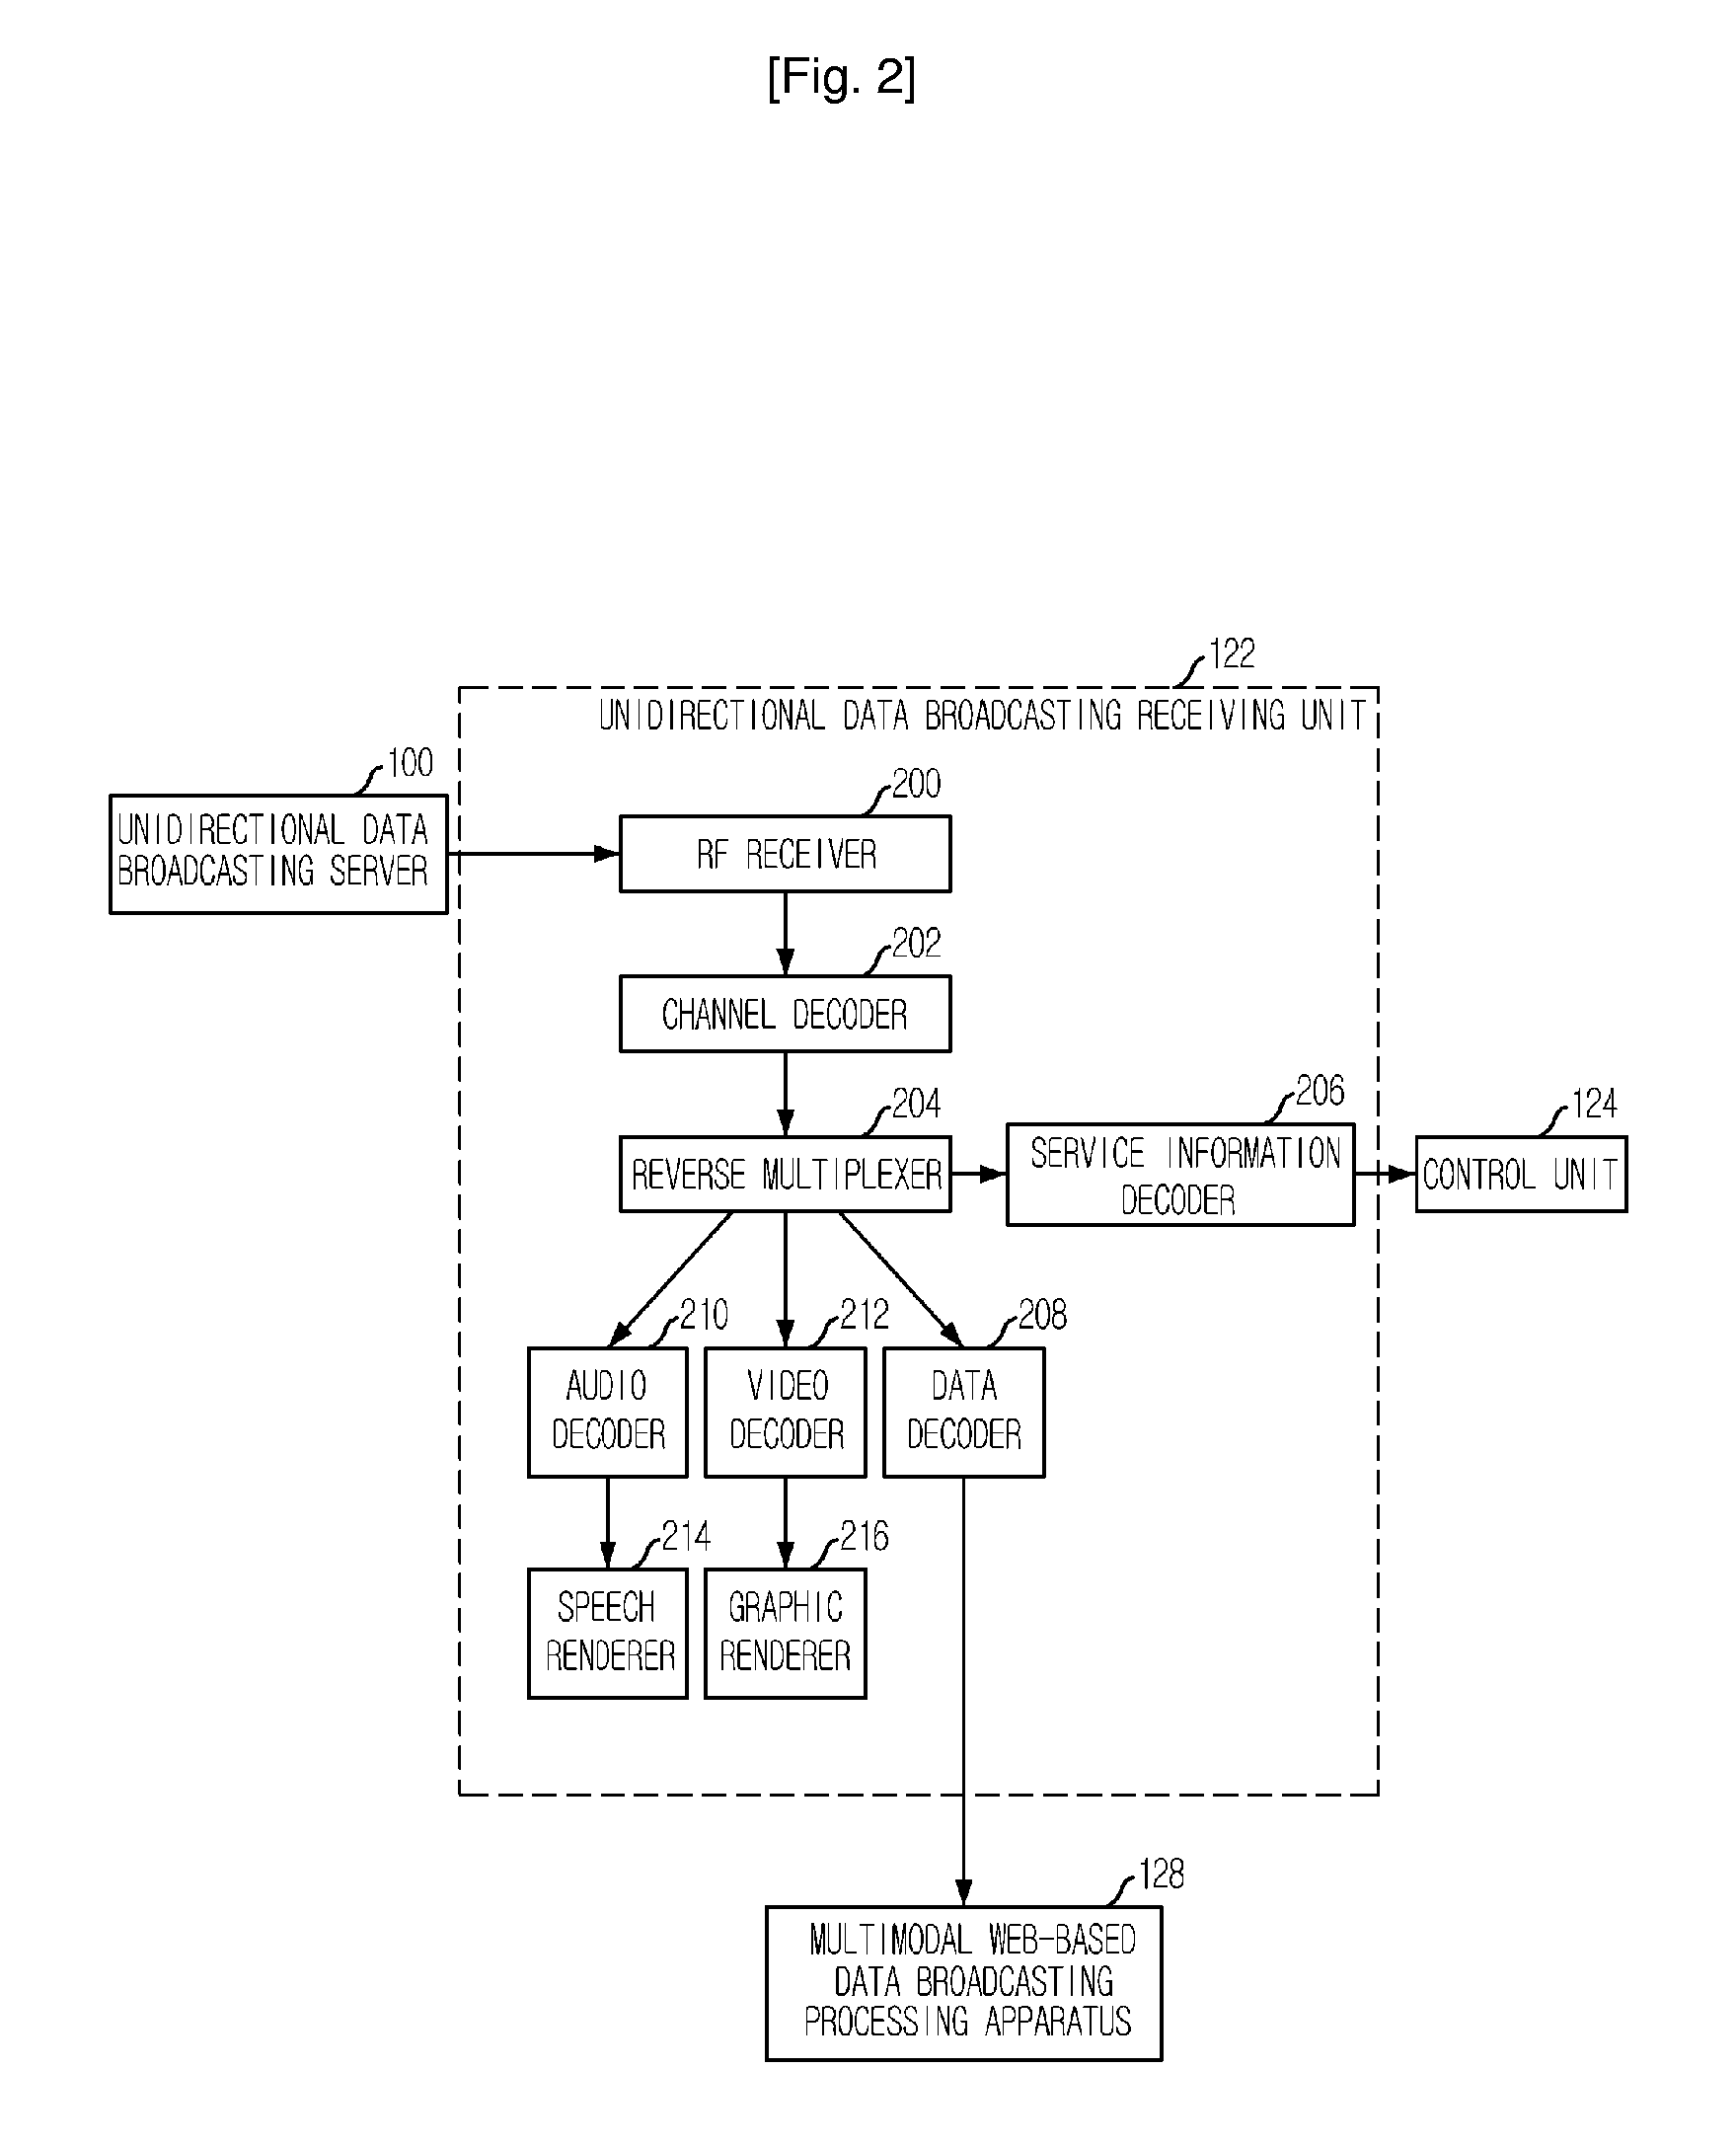 Apparatus and Method for Processing Multimodal Data Broadcasting and System and Method for Receiving Multimodal Data Broadcasting